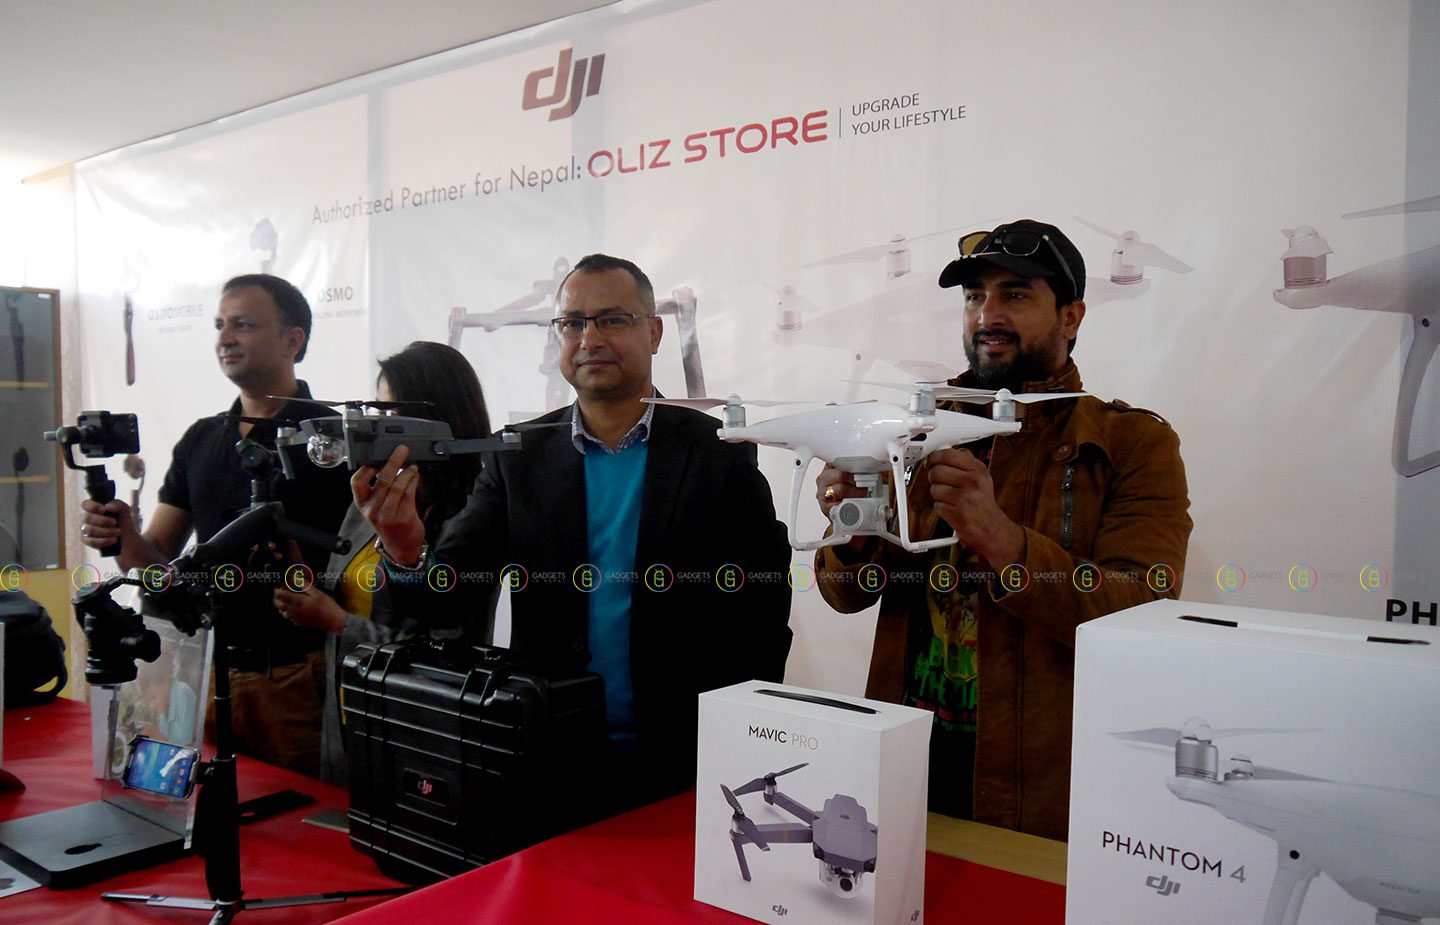 Oliz Store launched new products of DJI in Nepal